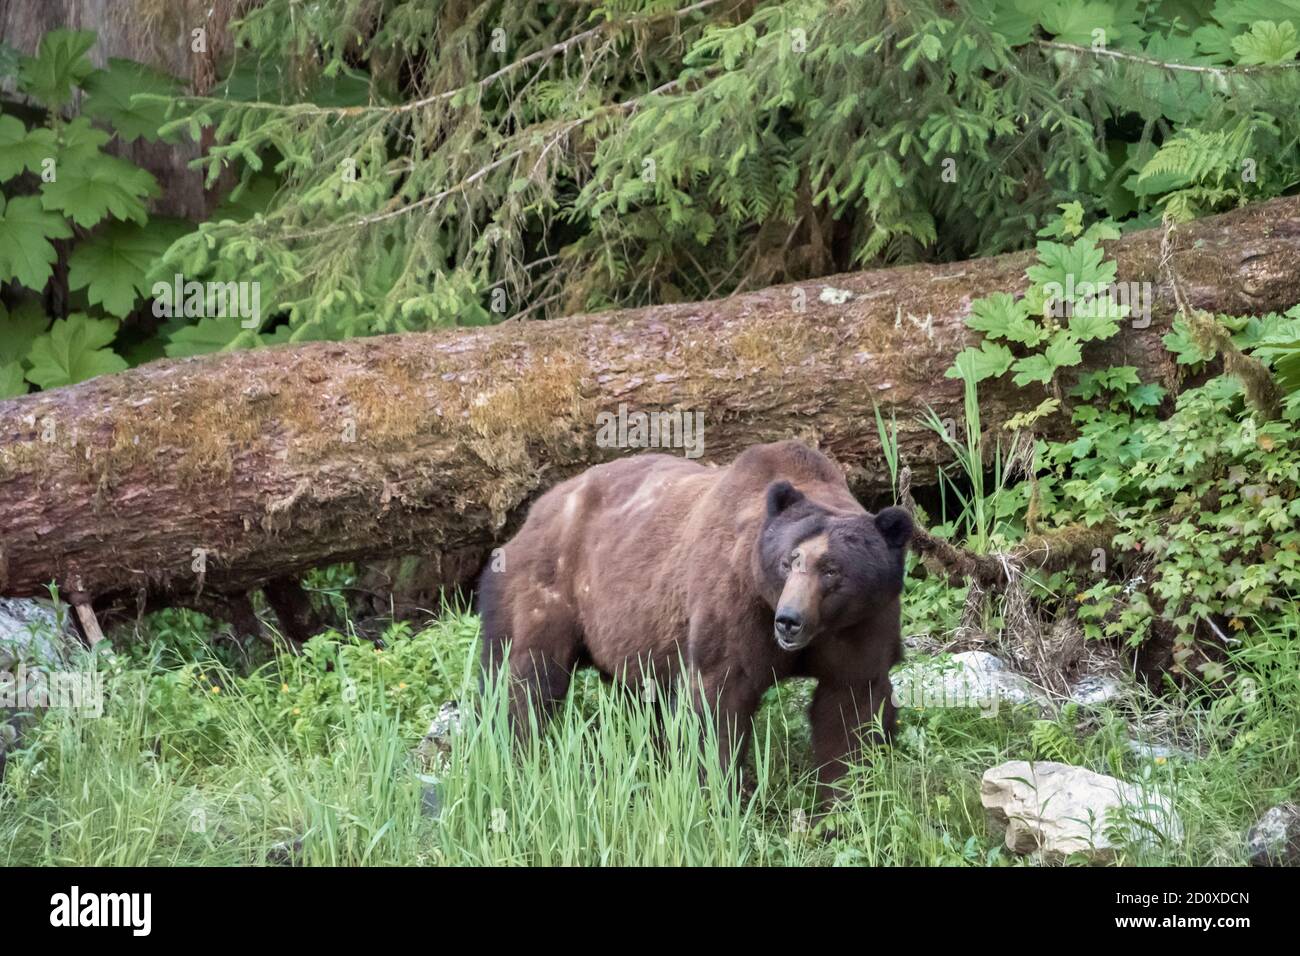 Large, dark old grizzly bear by a deadfall tree at the forest edge, Khutzeymateen, BC Stock Photo